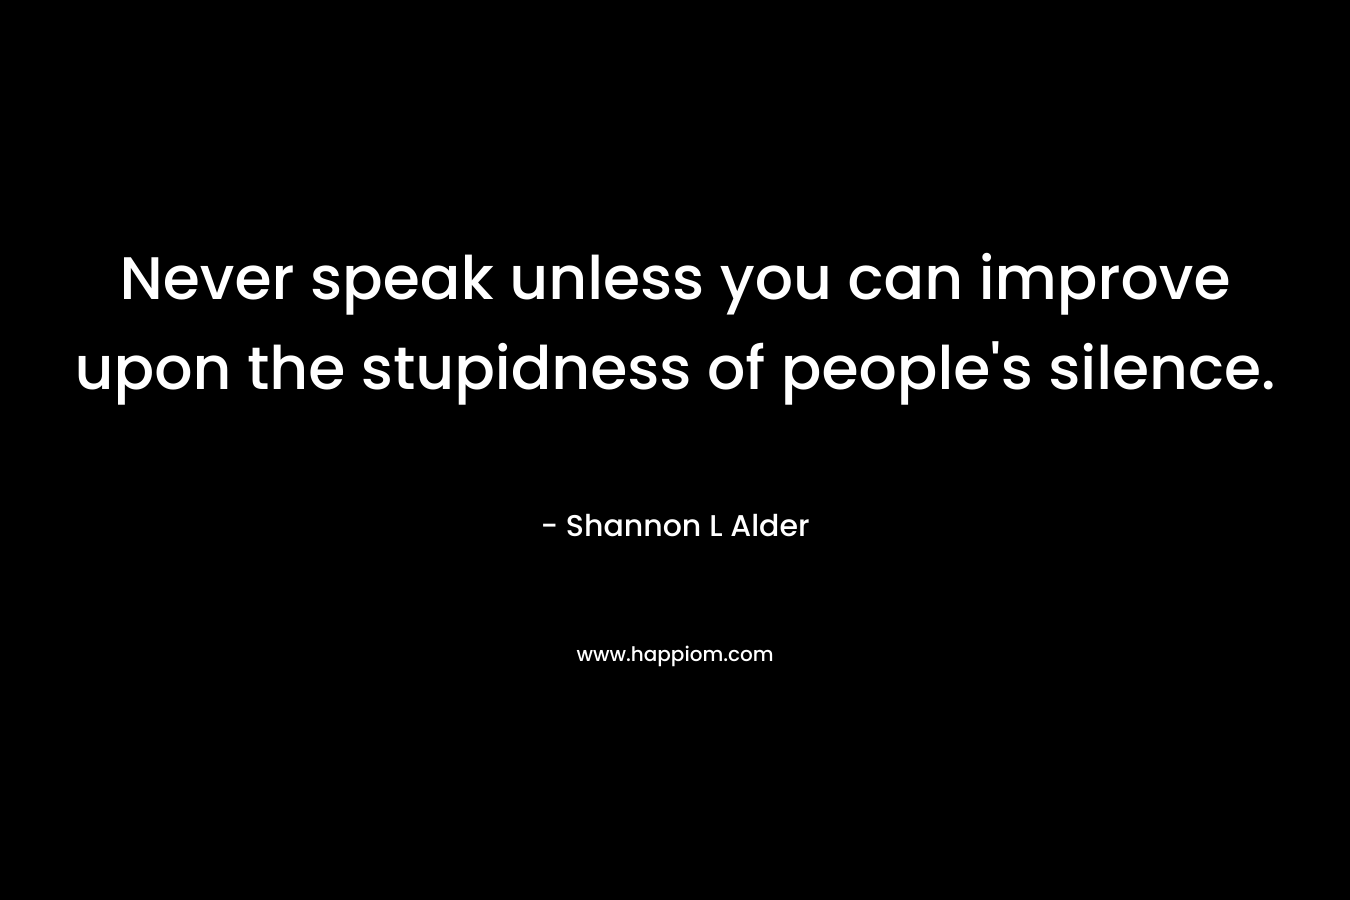 Never speak unless you can improve upon the stupidness of people's silence.